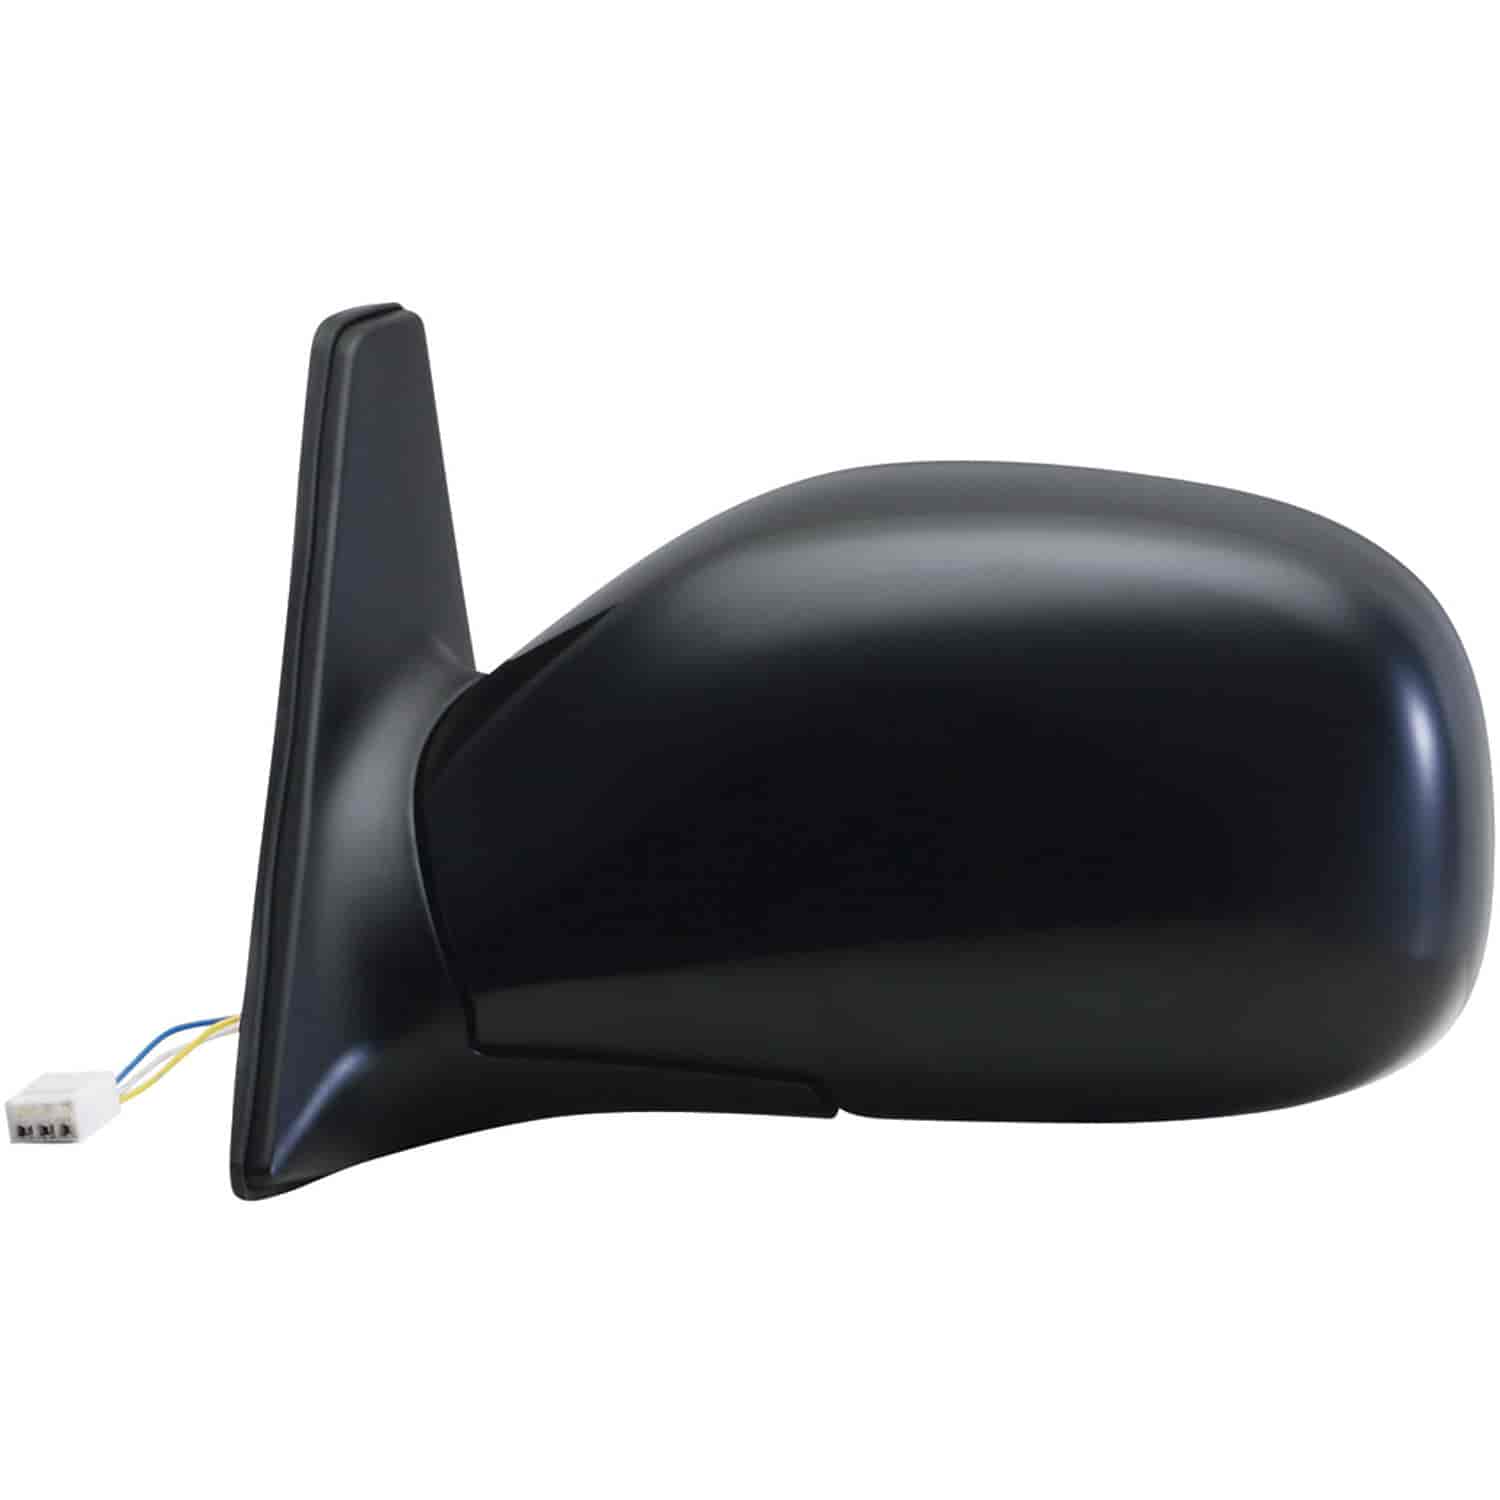 OEM Style Replacement mirror for 98-00 Toyota RAV4 4 Door driver side mirror tested to fit and funct